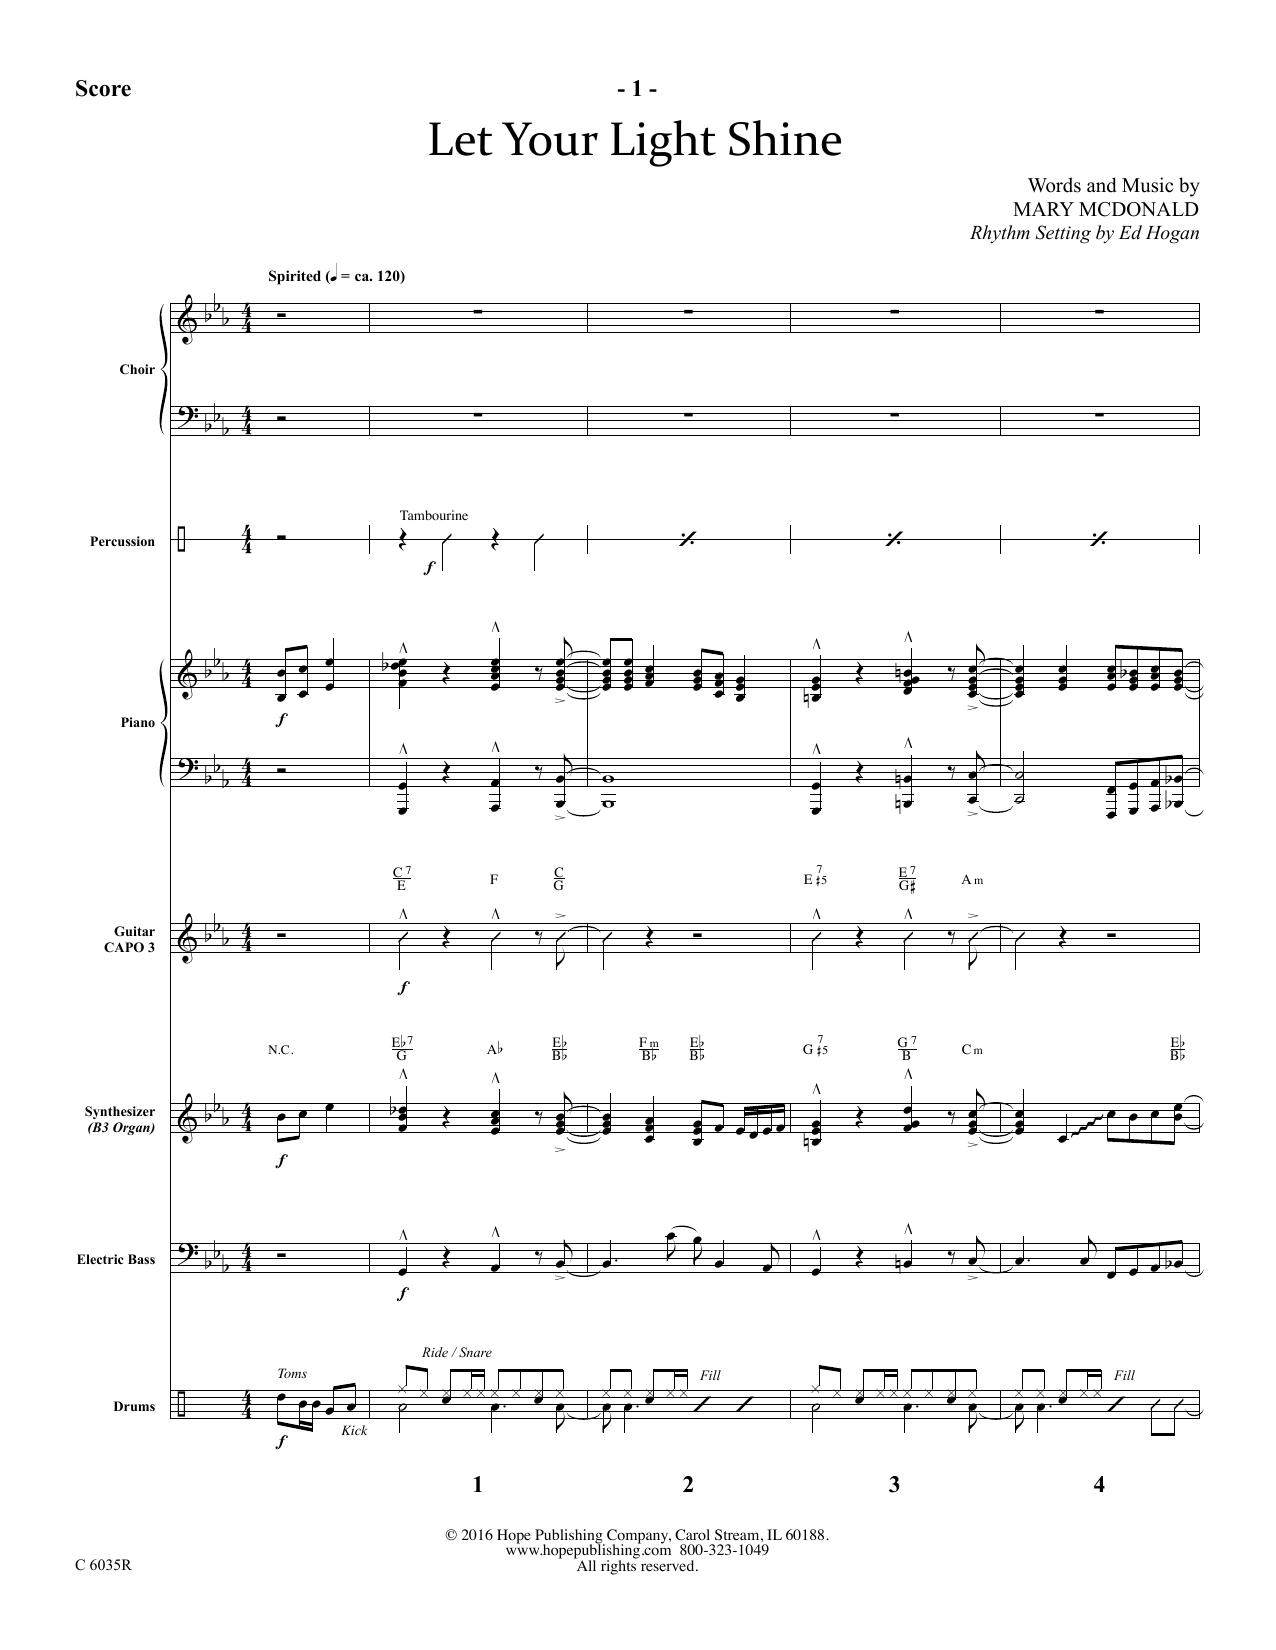 Download Mary McDonald Let Your Light Shine - Full Score Sheet Music